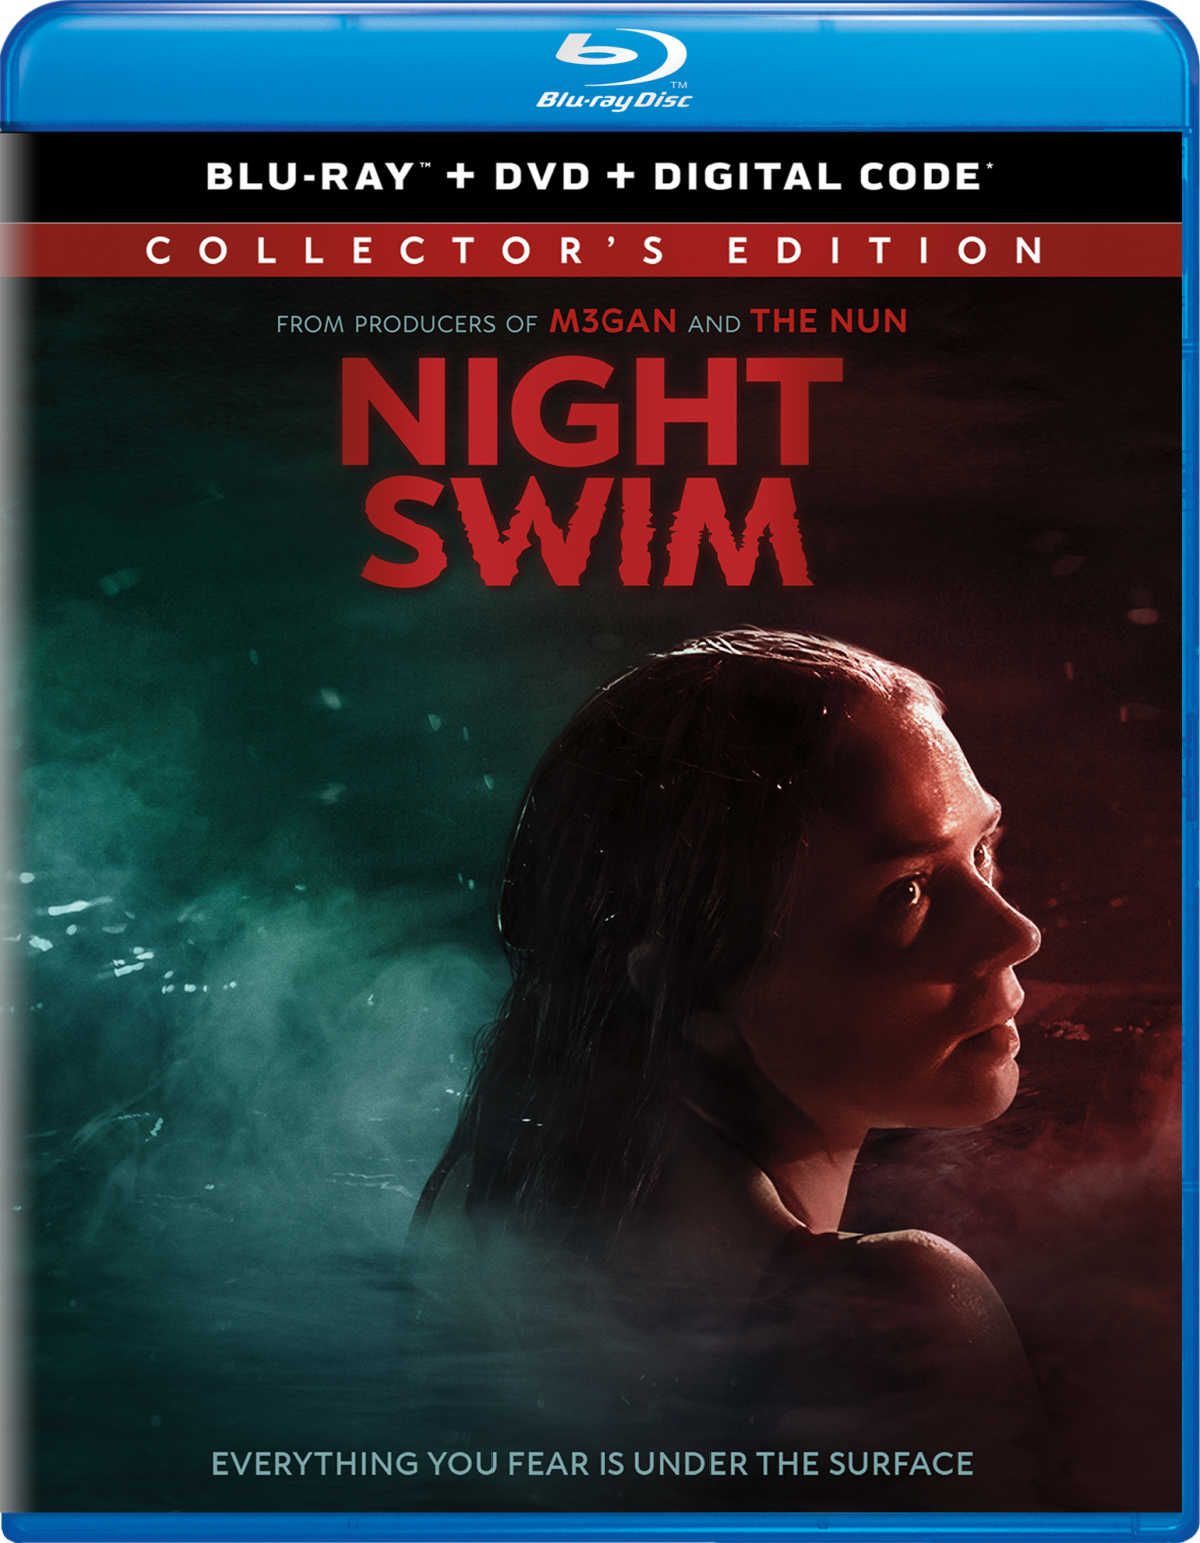 Night Swim delivers pure, classic horror chills! This suspenseful film will have you on the edge of your seat, guessing one moment and screaming the next. Get ready for incredible visuals and a story that feels terrifyingly real.